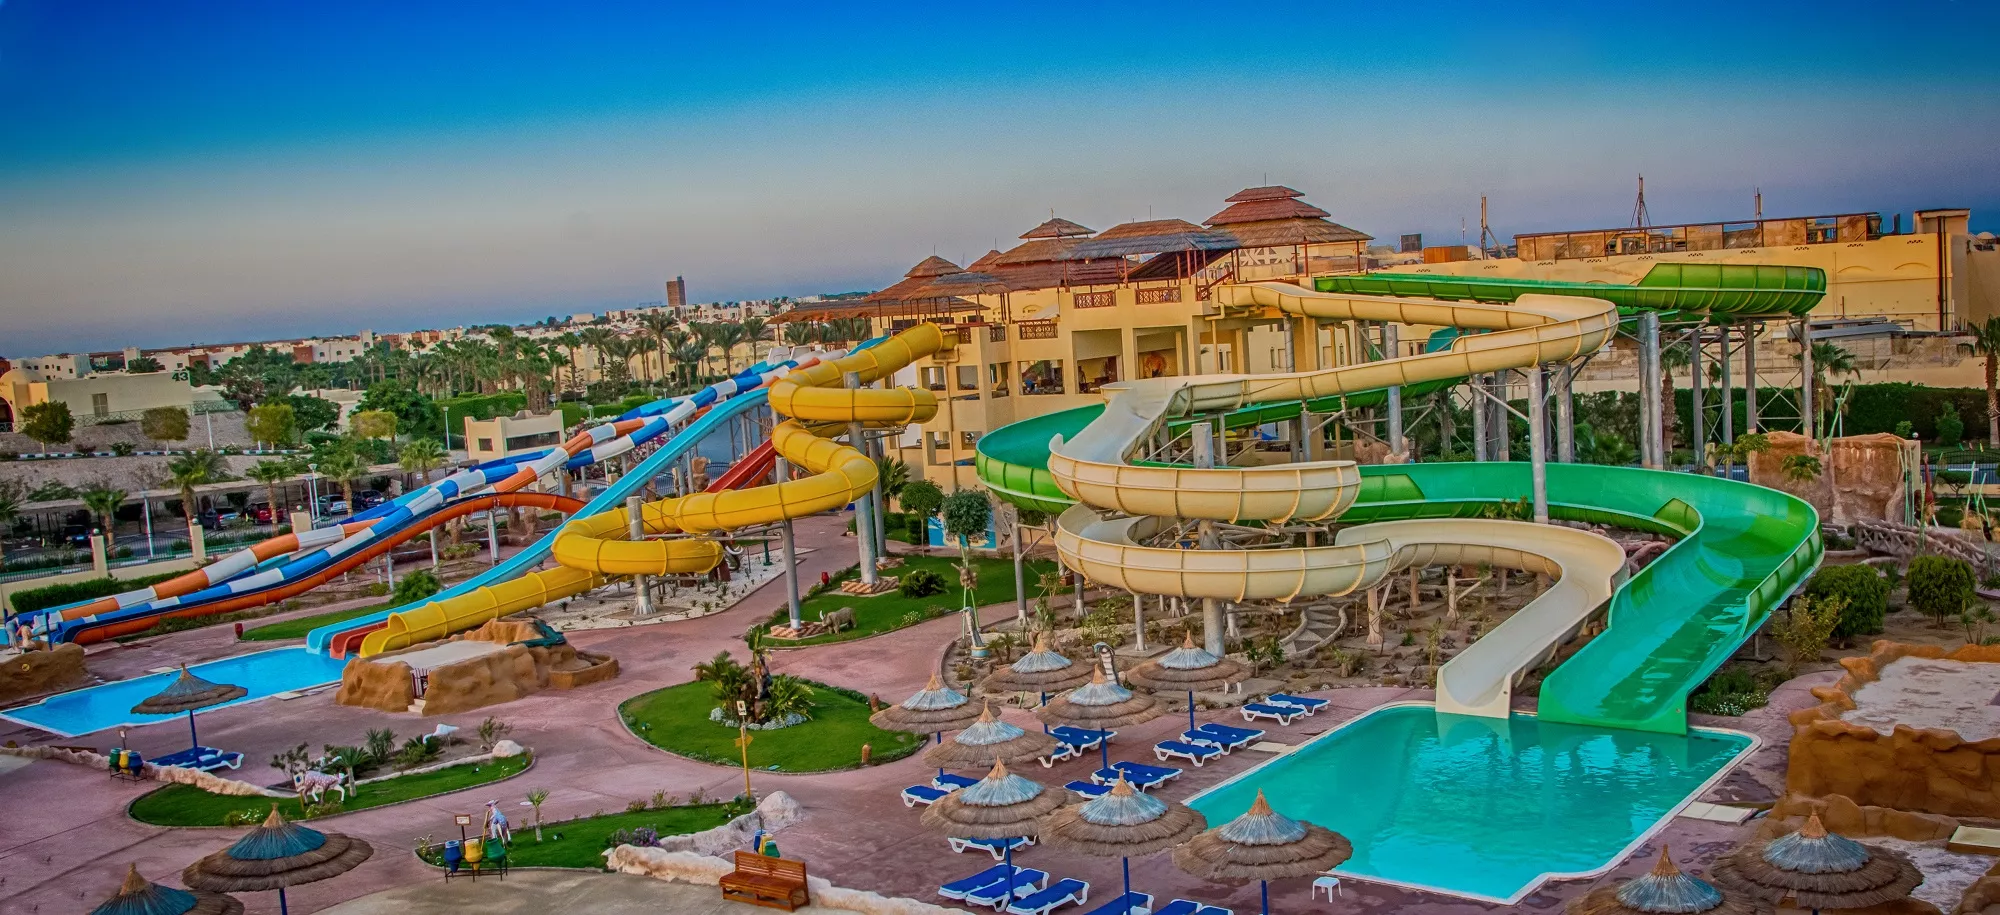 Makadi Bay Aqua Park in Egypt, Africa | Water Parks - Rated 3.8